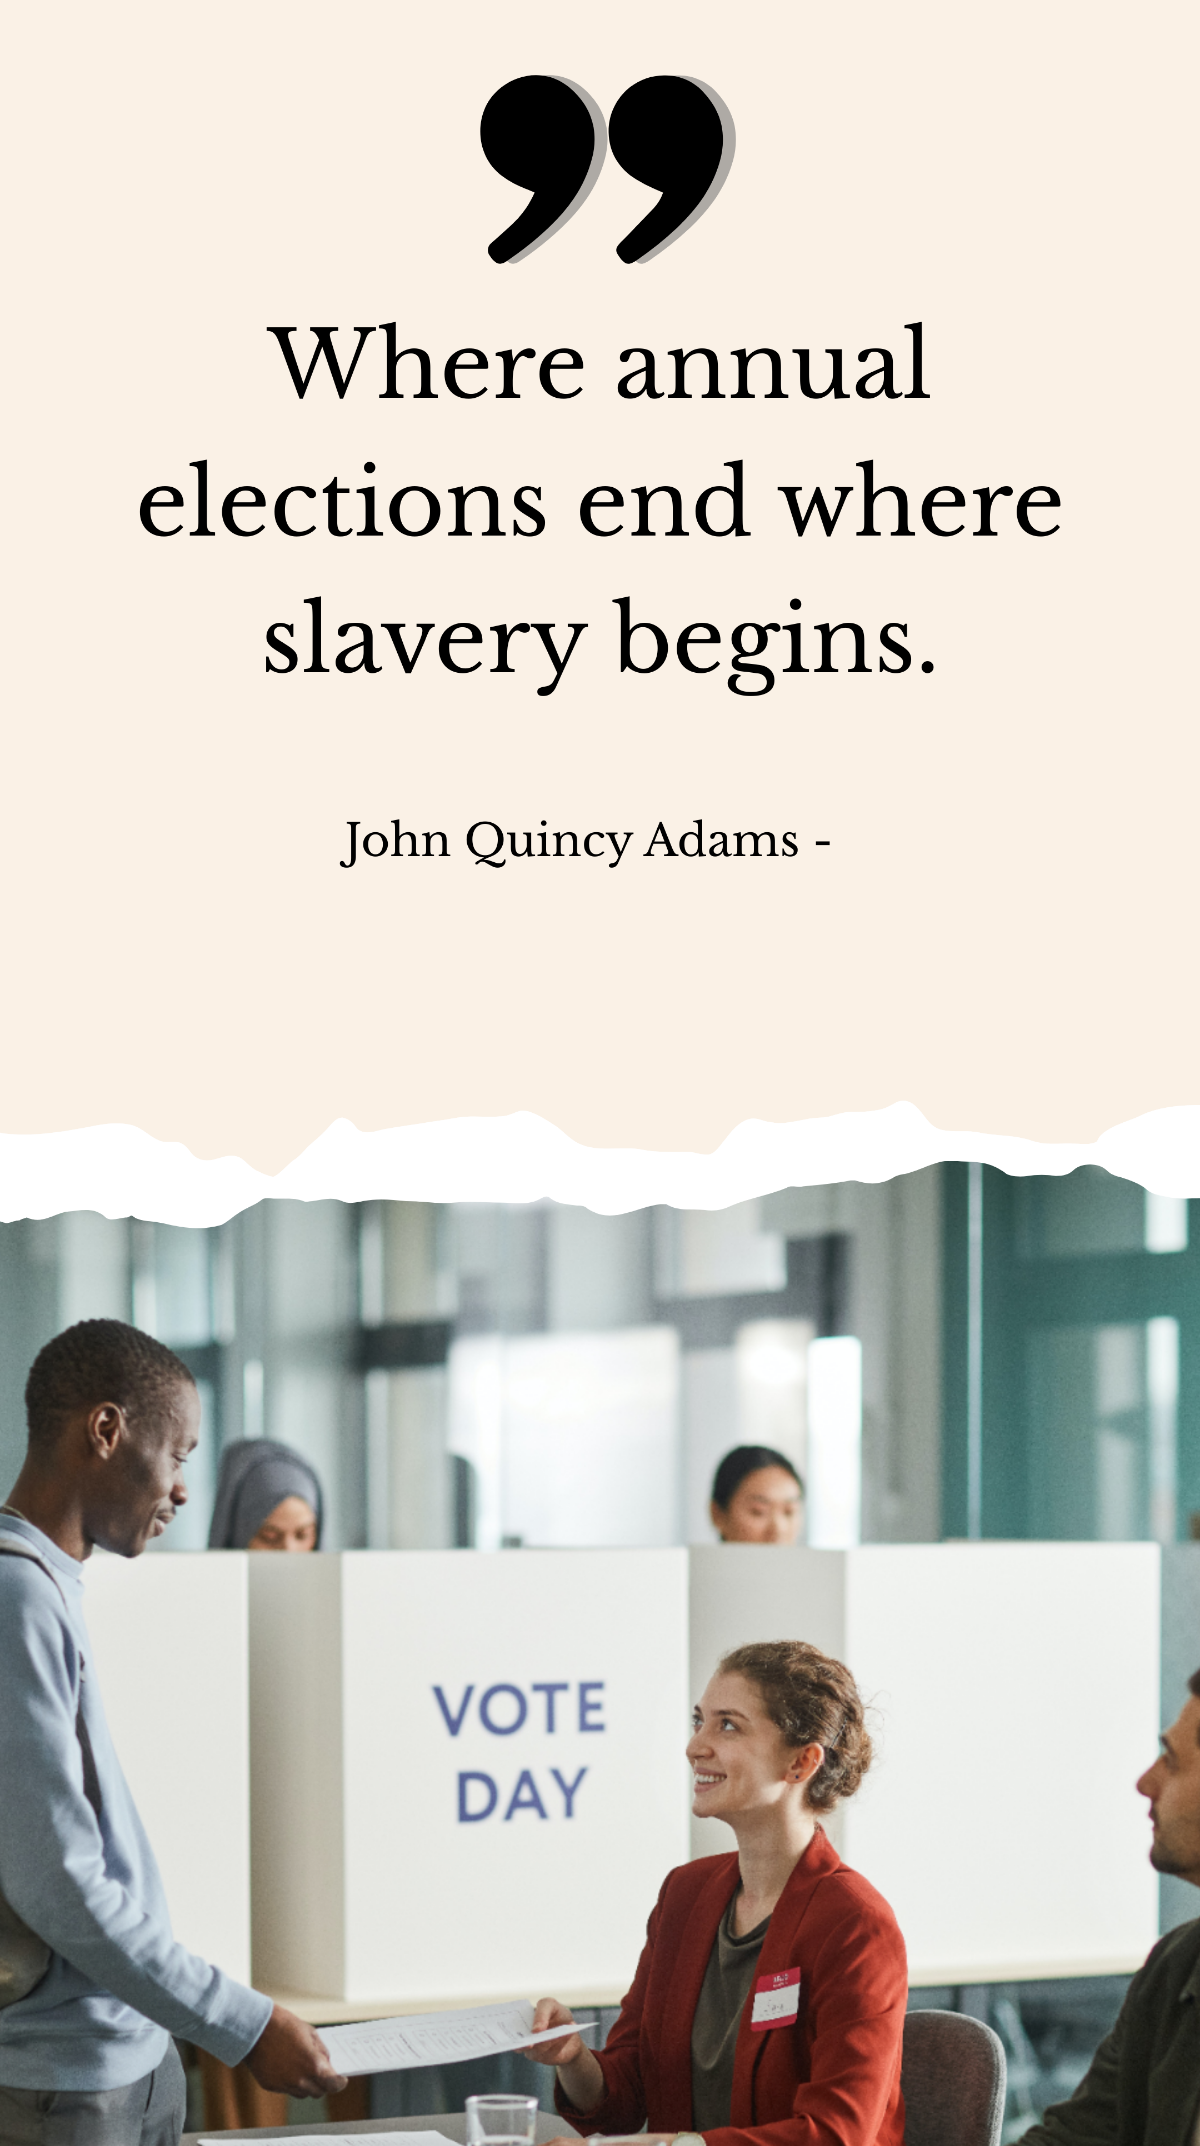 John Quincy Adams - Where annual elections end where slavery begins. Template